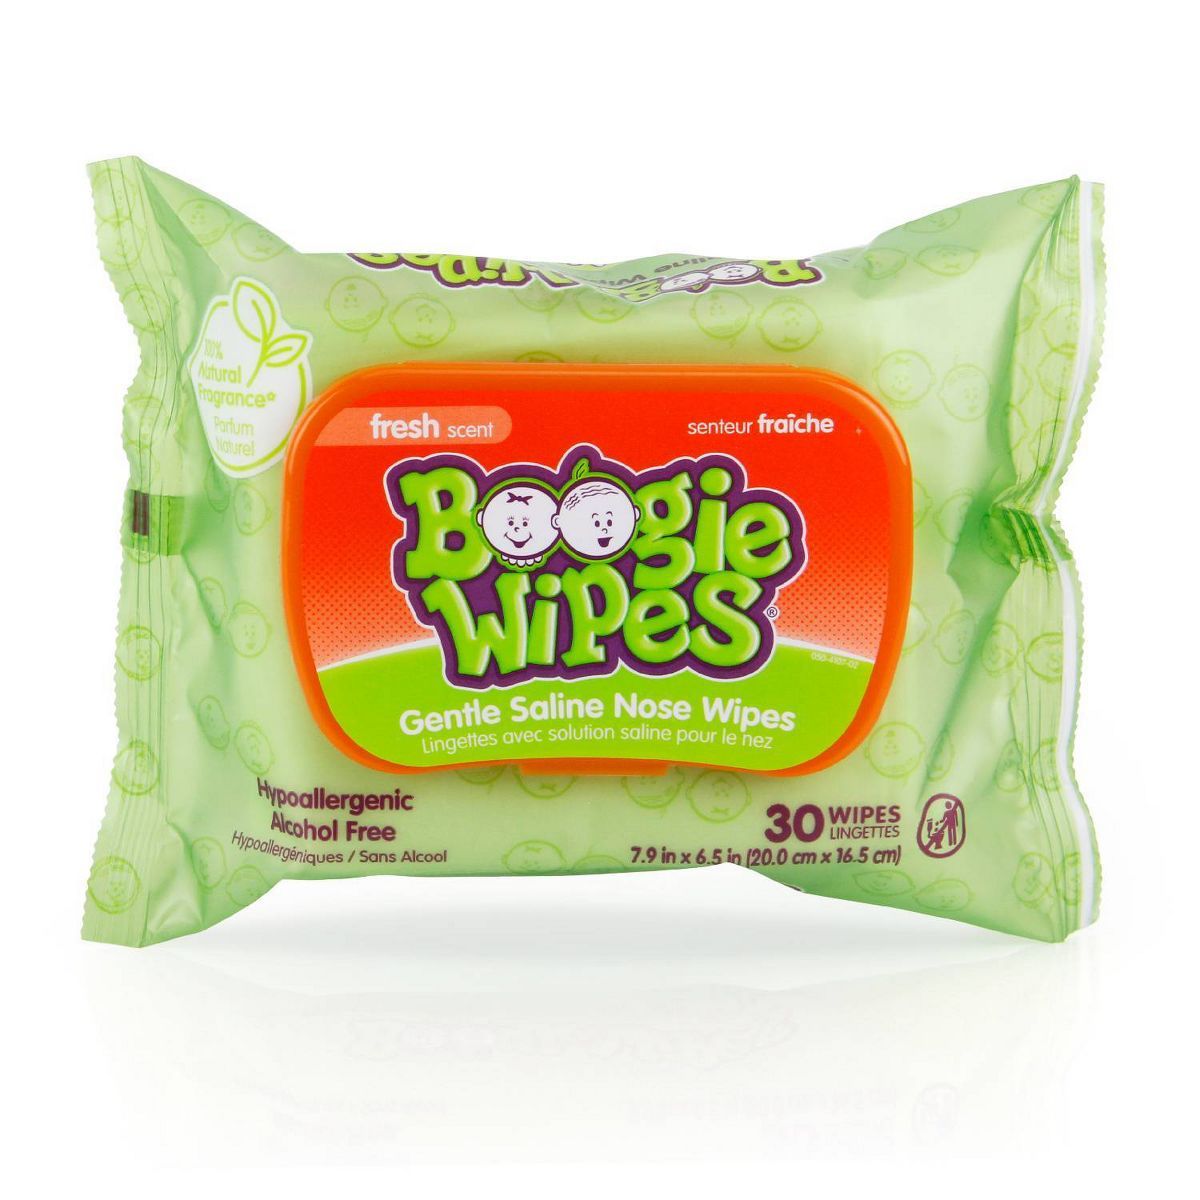 Boogie Wipes Saline Nose Wipes Fresh Scent - 30ct | Target